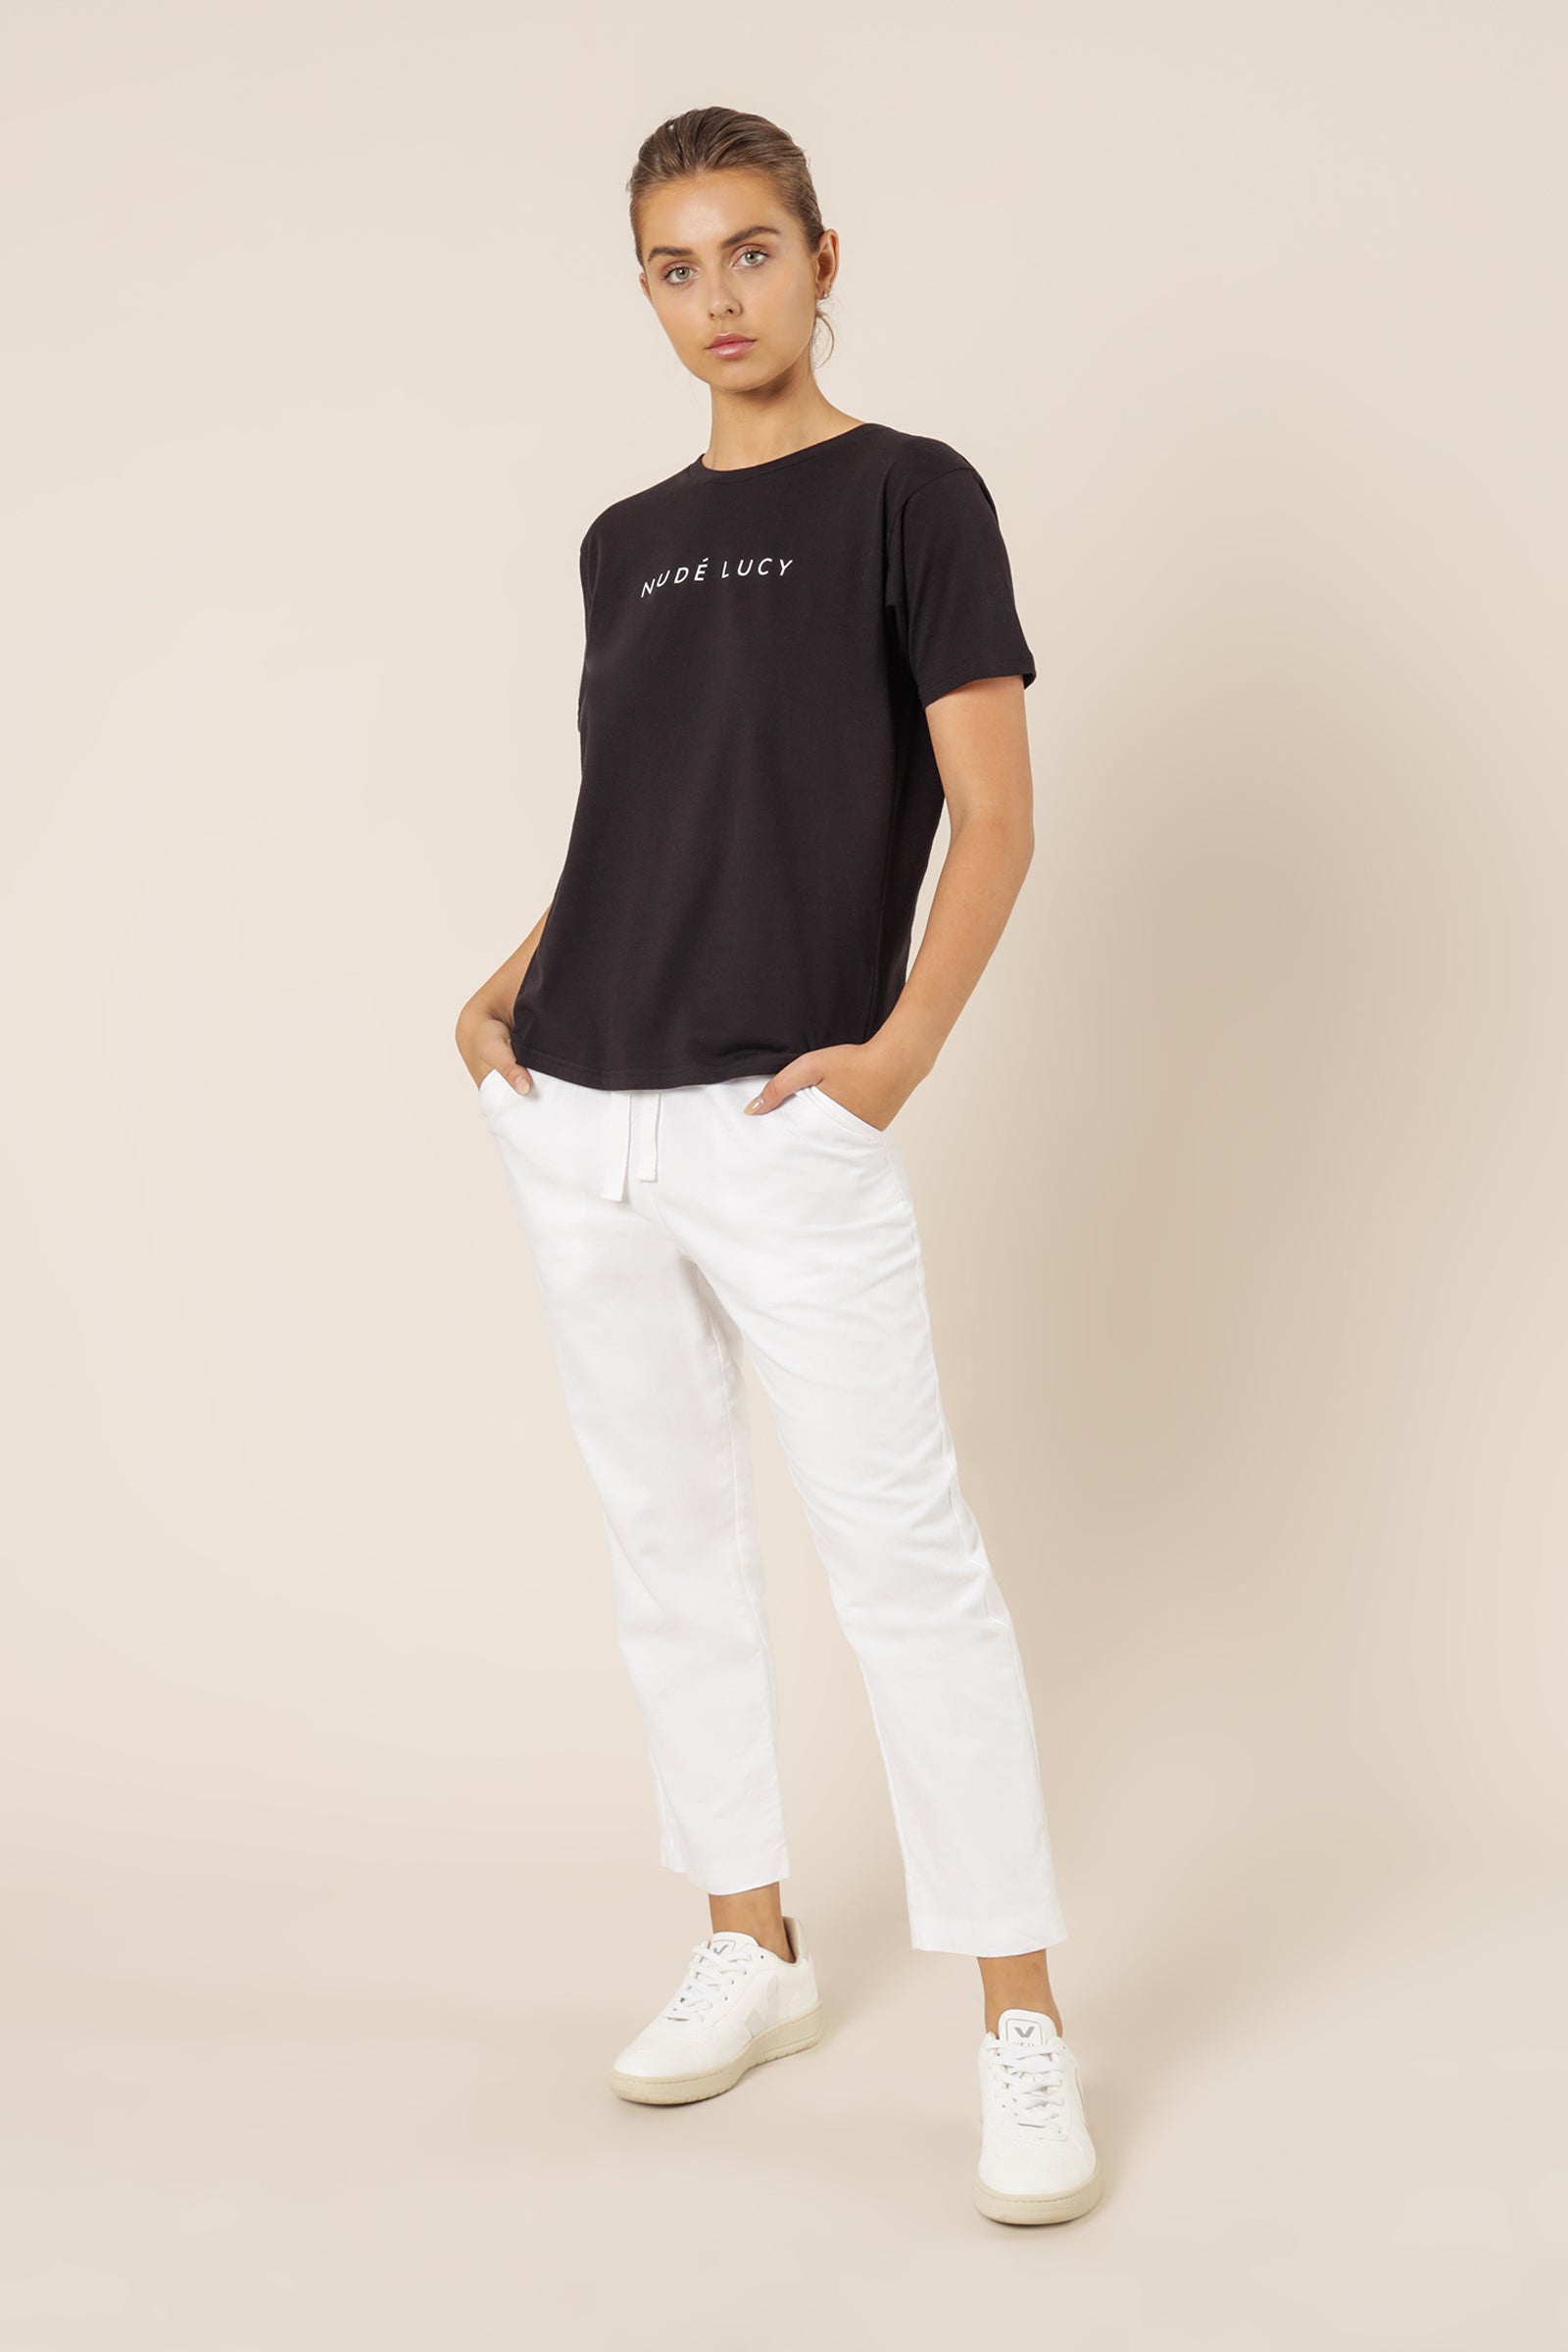 Nude Lucy Nude Lucy slogan tee washed black top